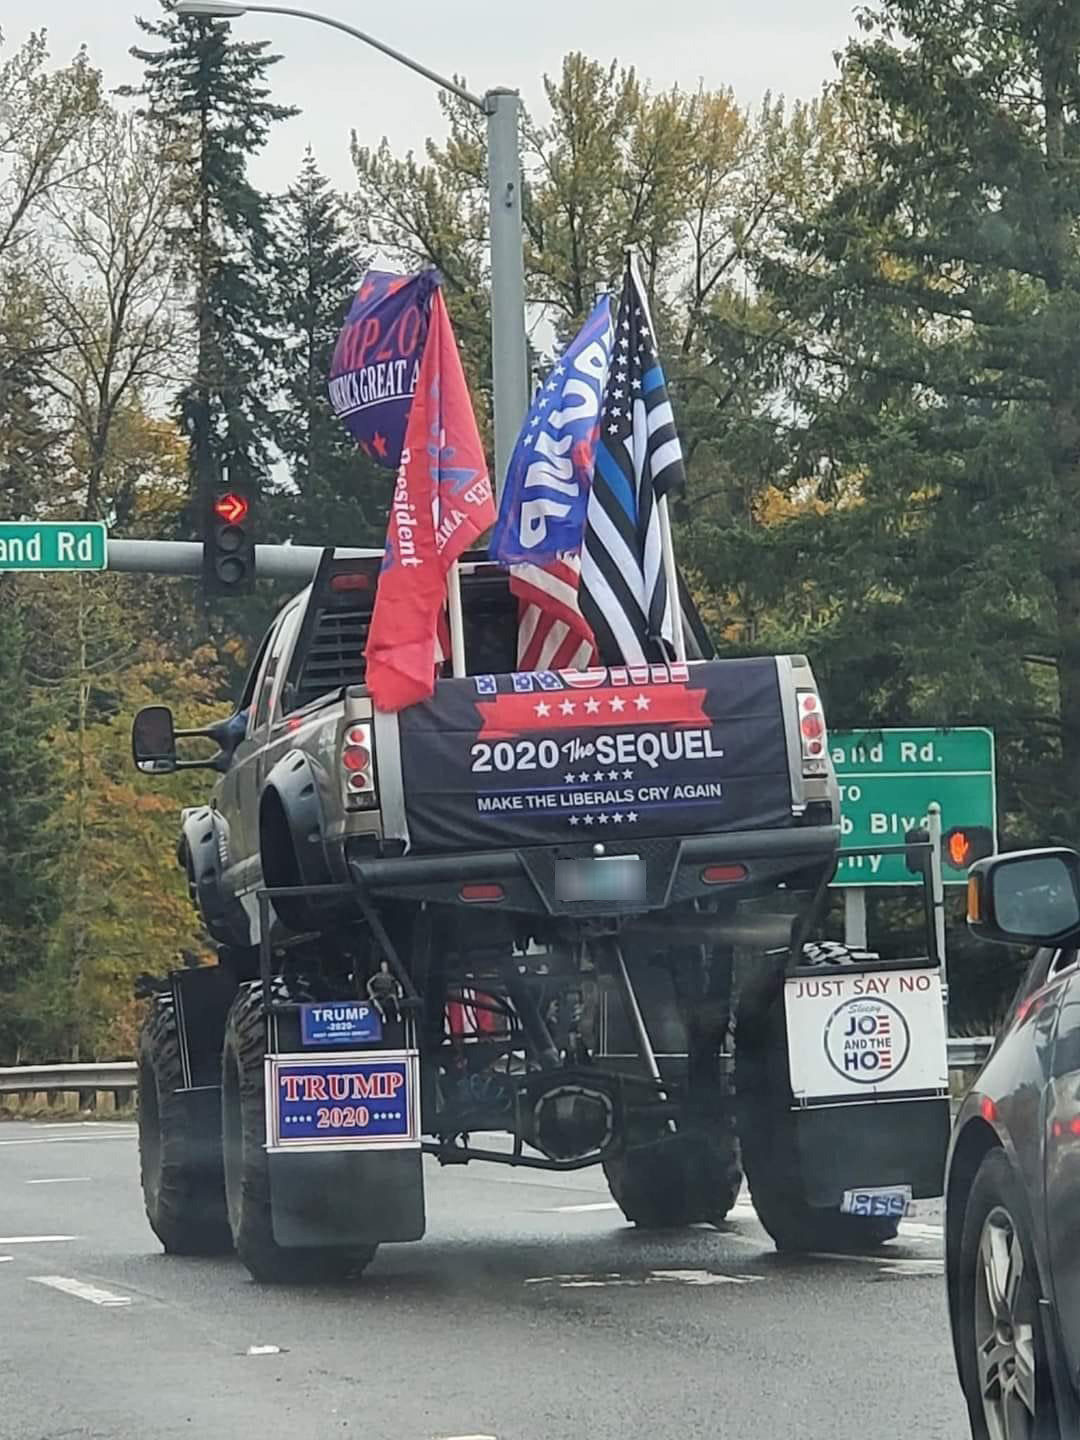 A pickup truck with huge lifted wheels and tons of pro-Trump flags and stickers that say things like &quot;2020 the sequel make the liberals cry again&quot;